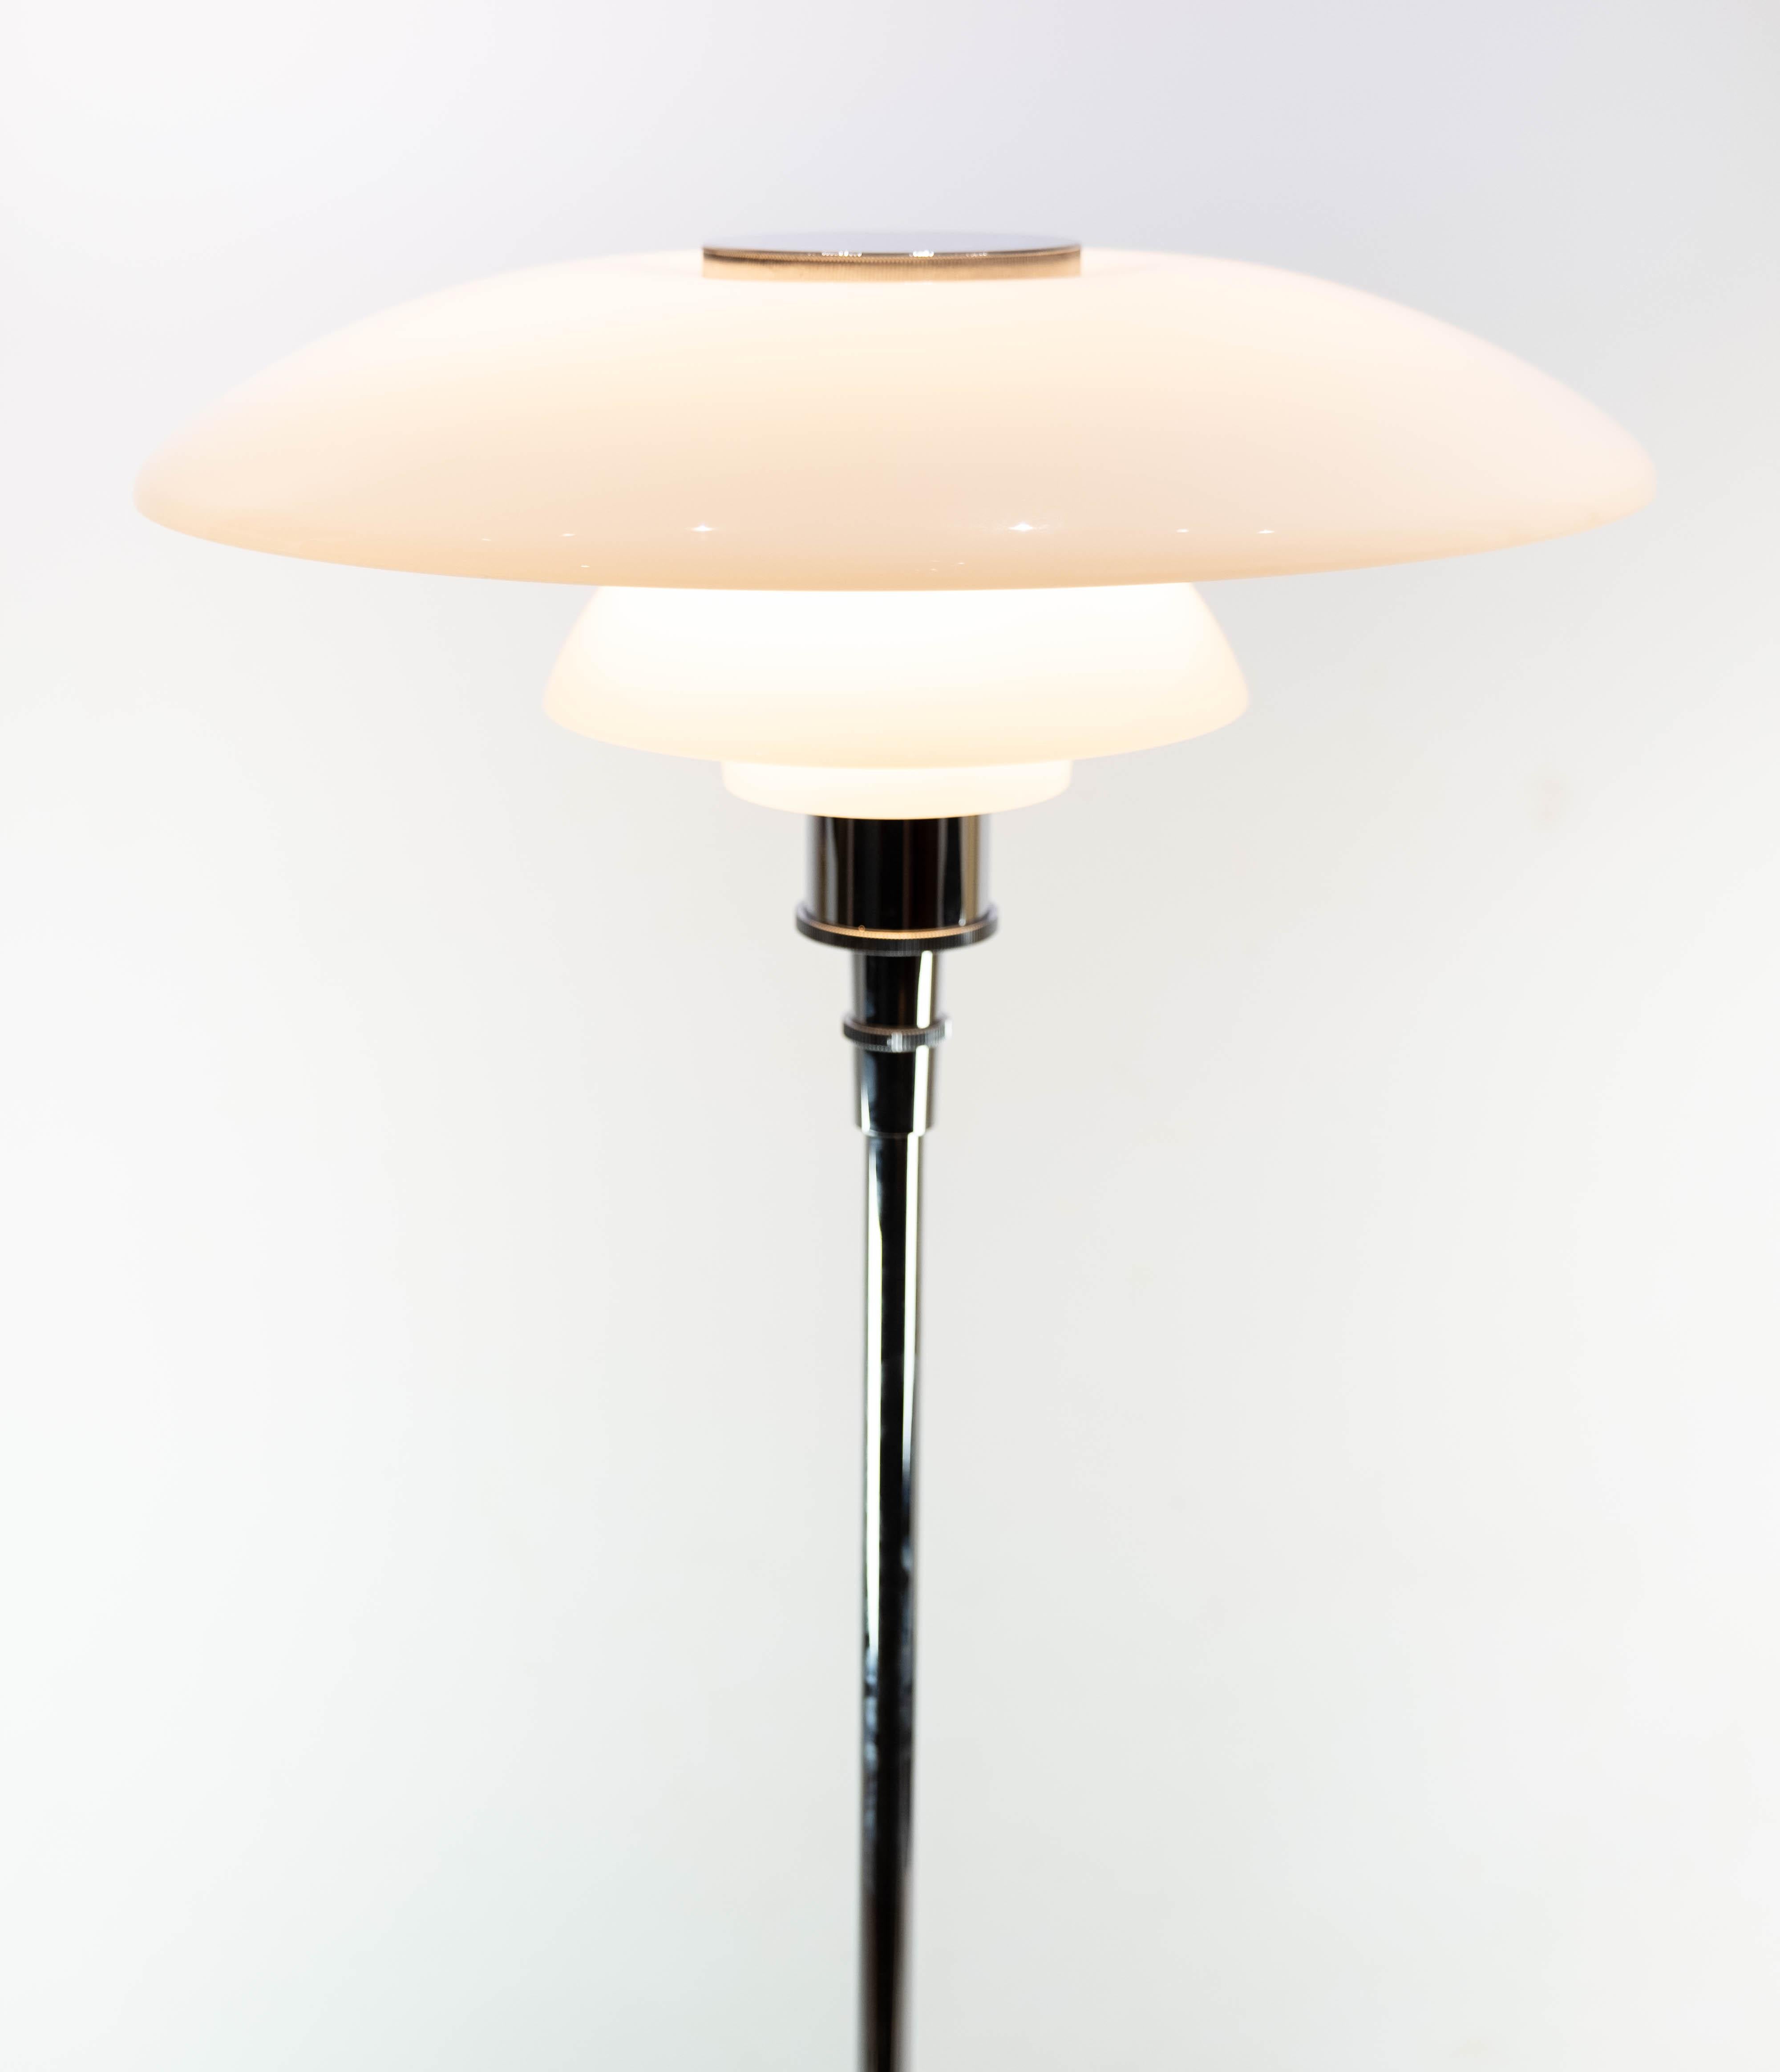 The PH 4 1/2-3 1/2 floor lamp, characterized by its elegant chrome frame and opaline glass shades, is a quintessential example of Scandinavian Modern design. Created by the renowned Danish designer Poul Henningsen, this lamp showcases his signature